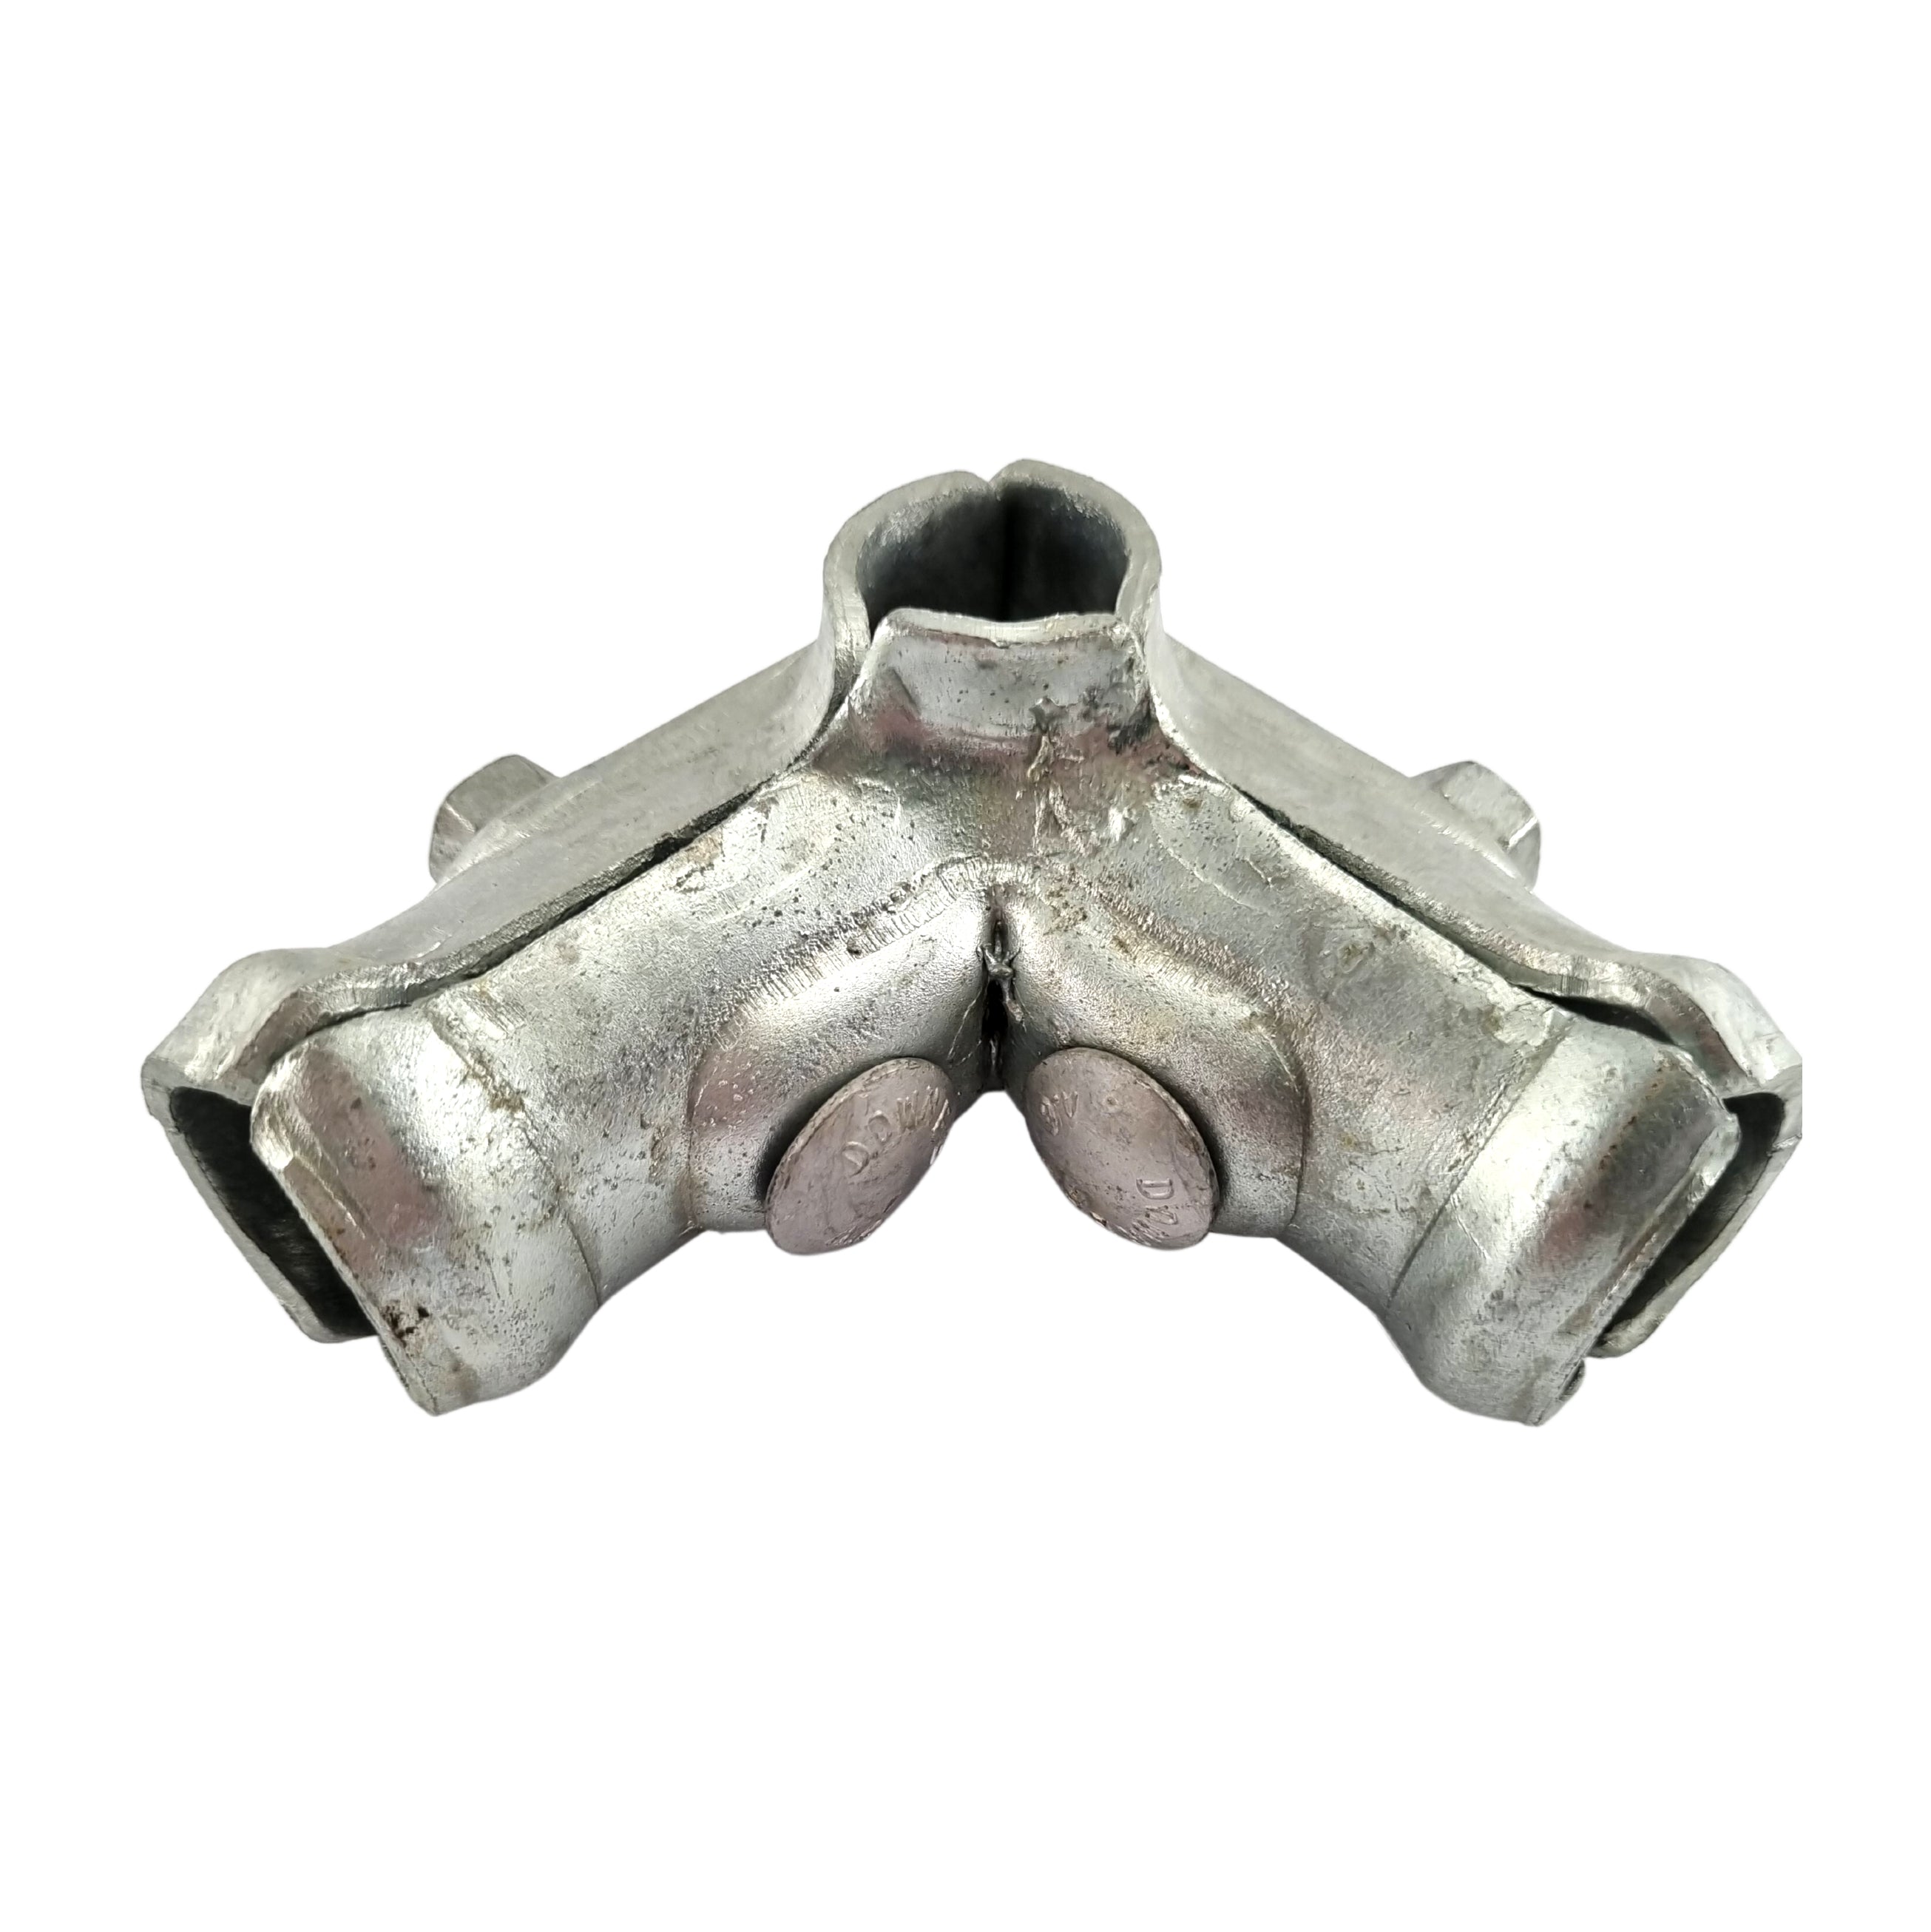 Corner Pipe Fittings in a galvanised finish, Australian made. Various sizes: from C2020 - 20/20 to C5050 - 50/50. Australia wide shipping. Shop online chain.com.au.